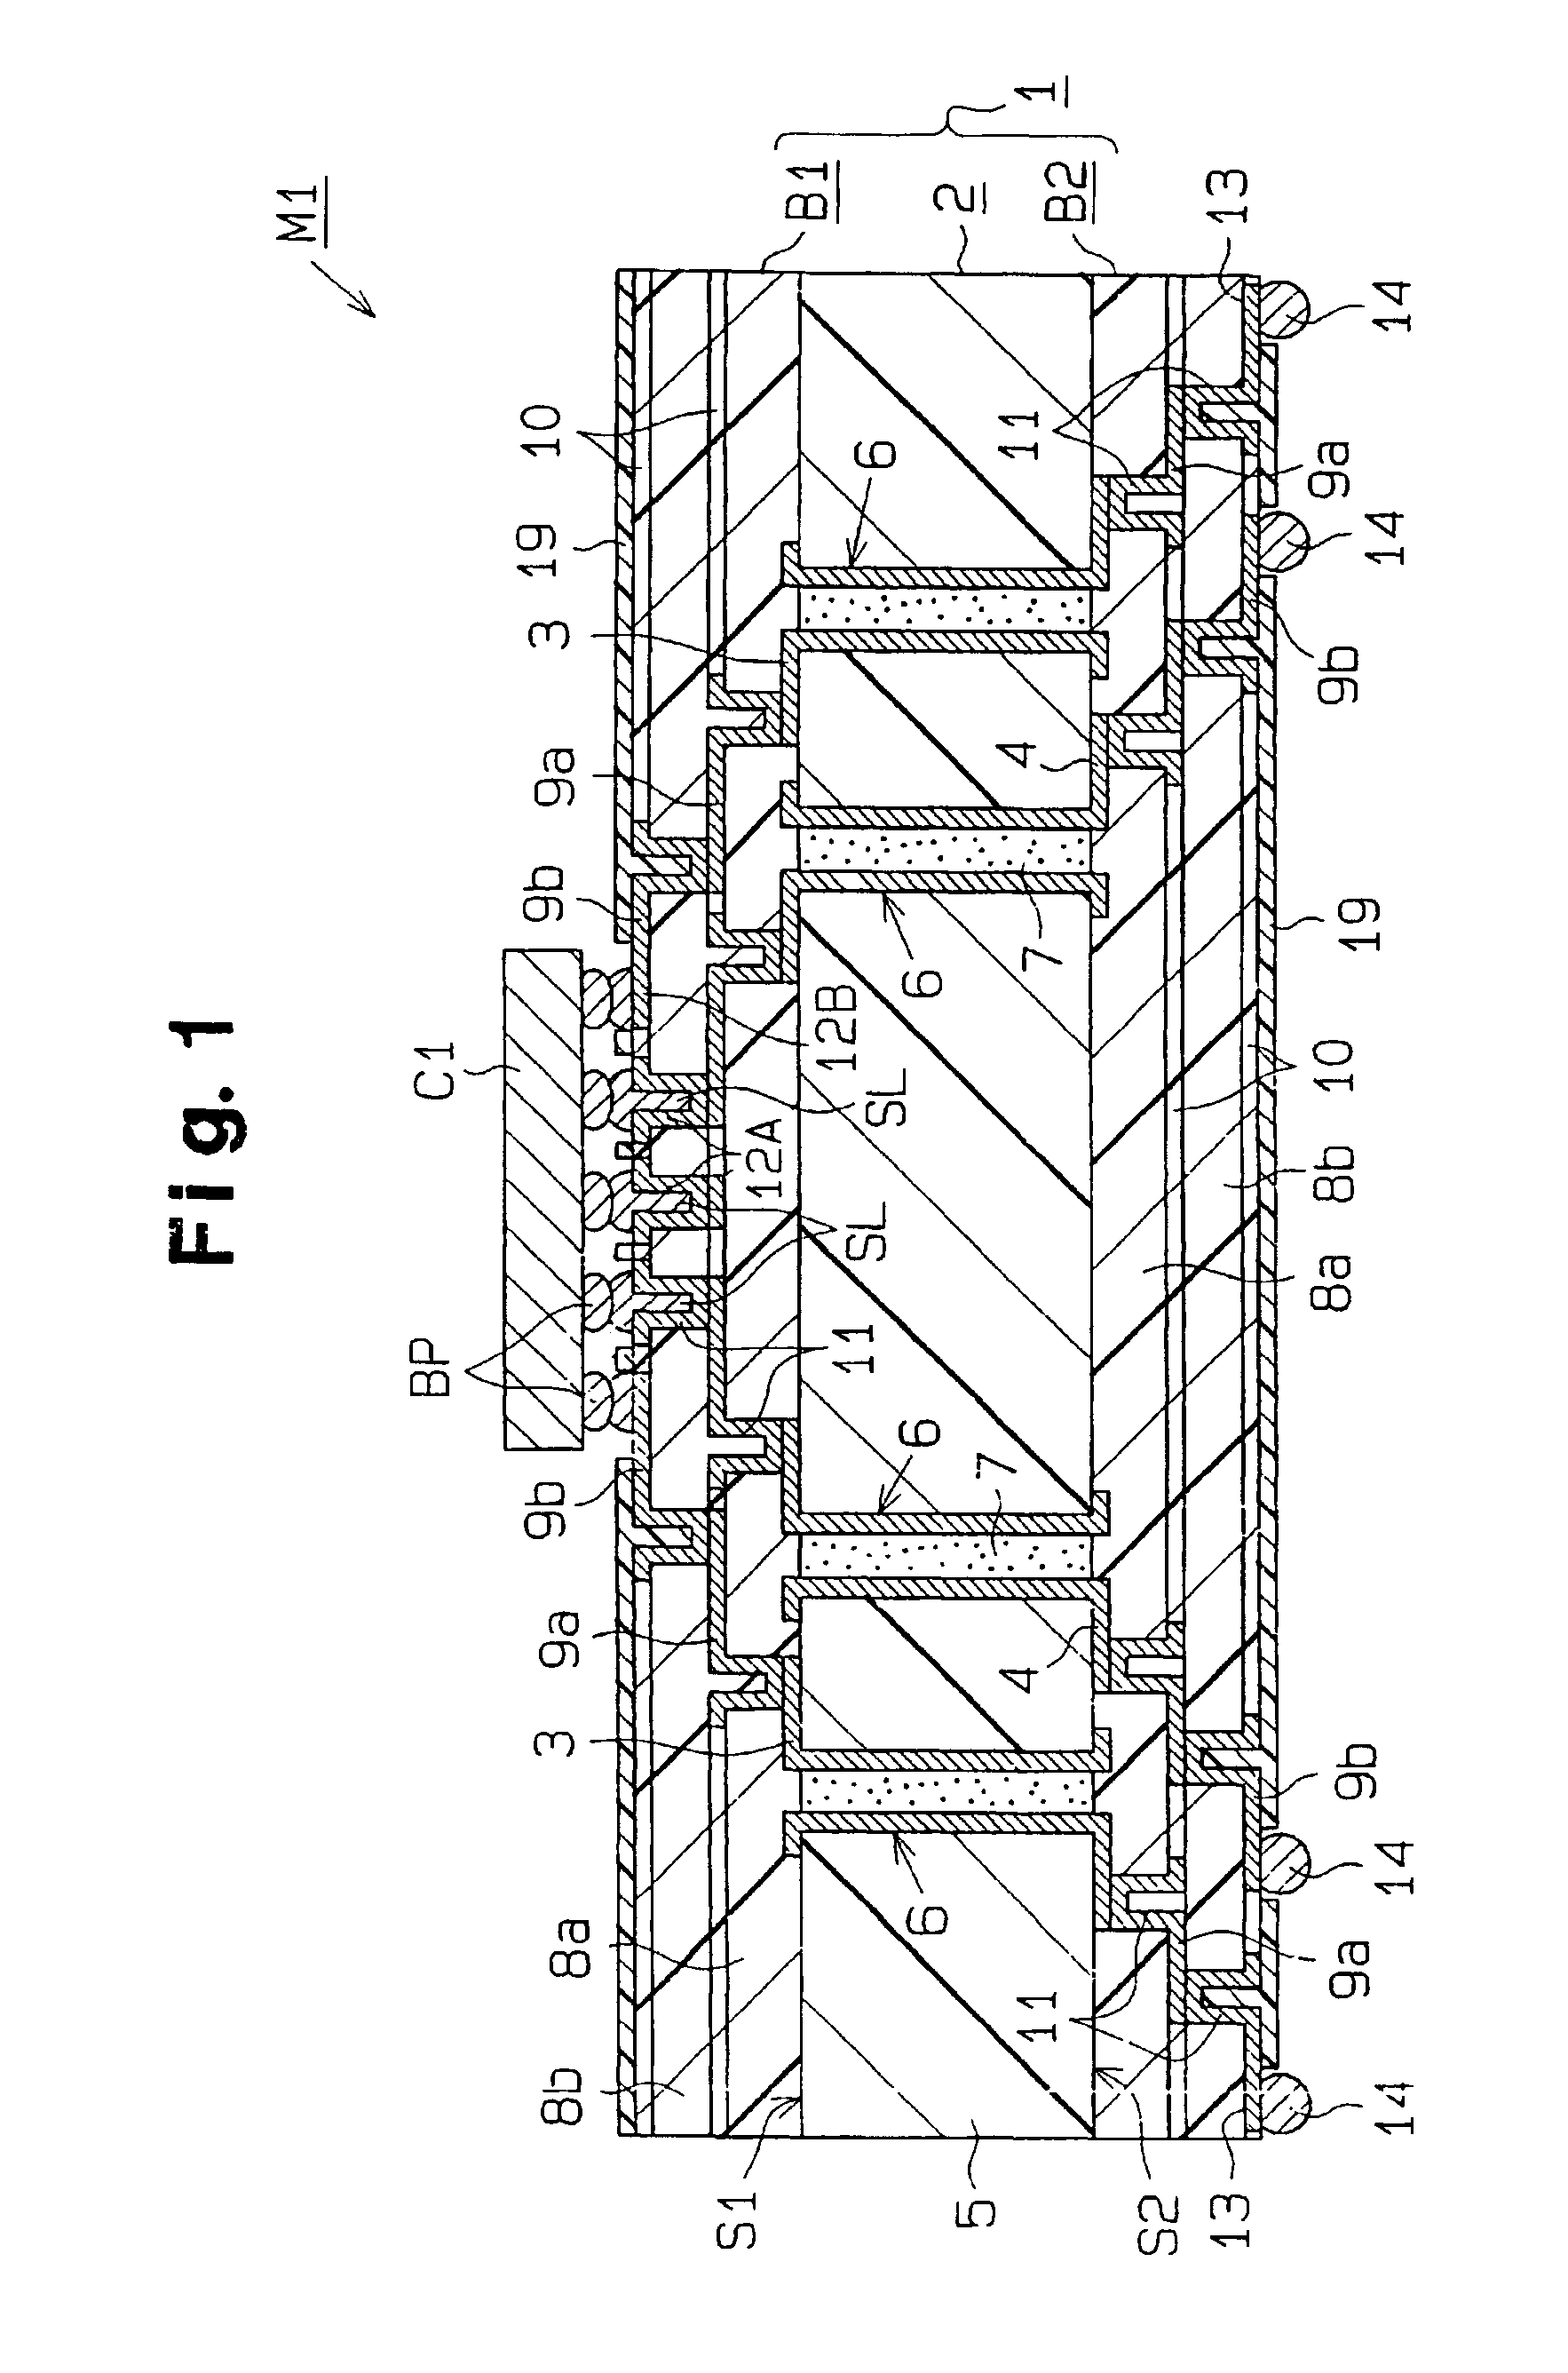 Circuit board for mounting electronic parts